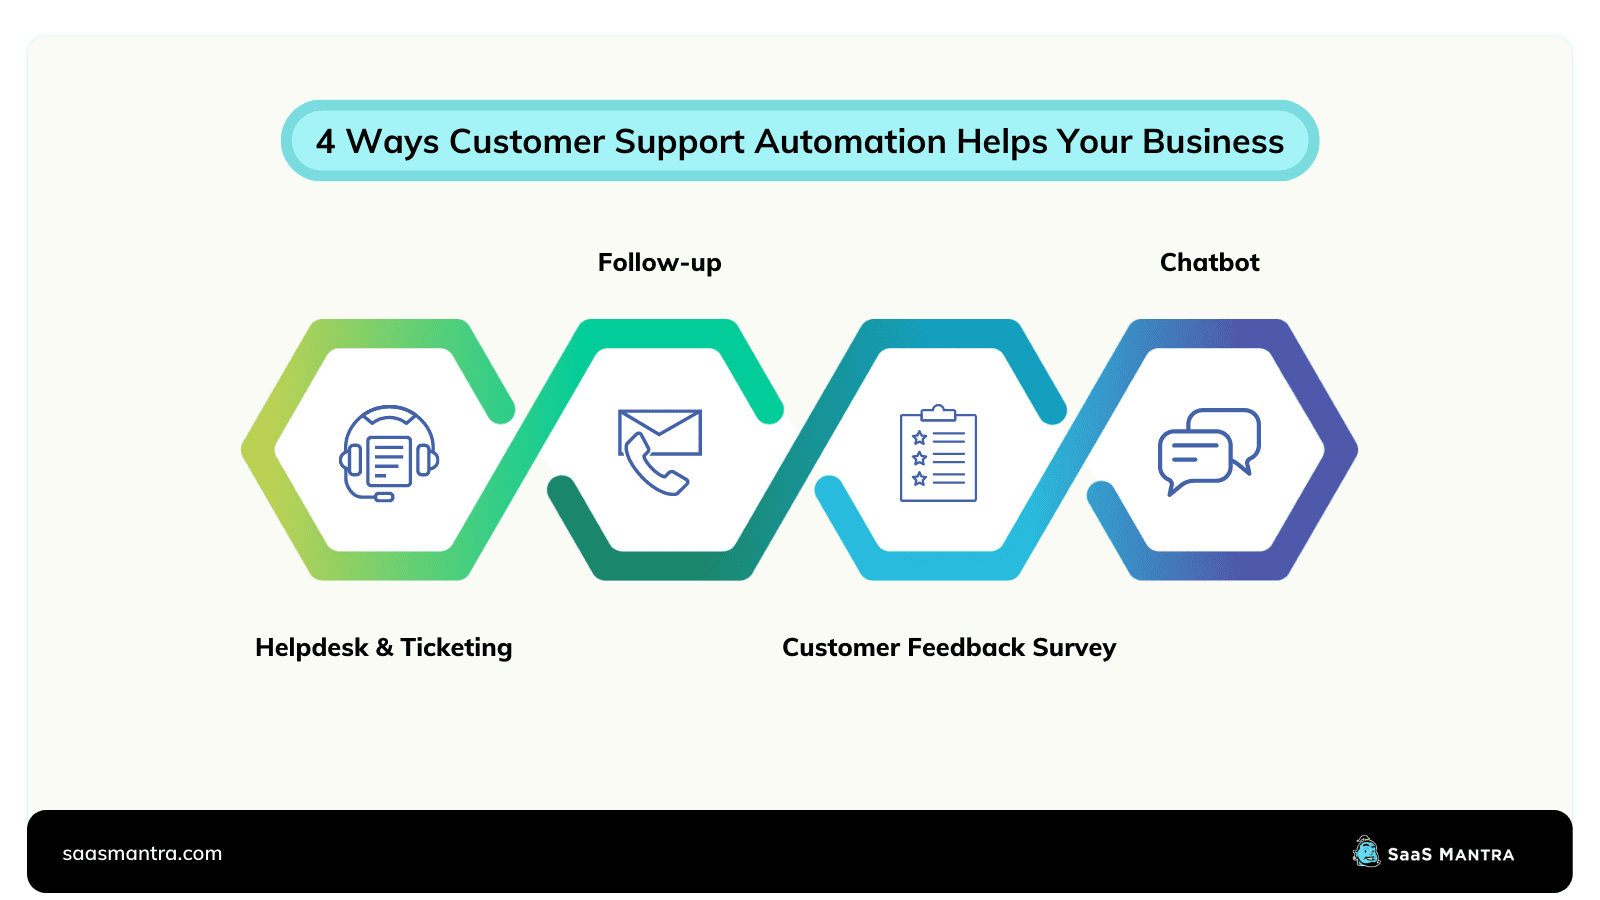 Customer support automation areas